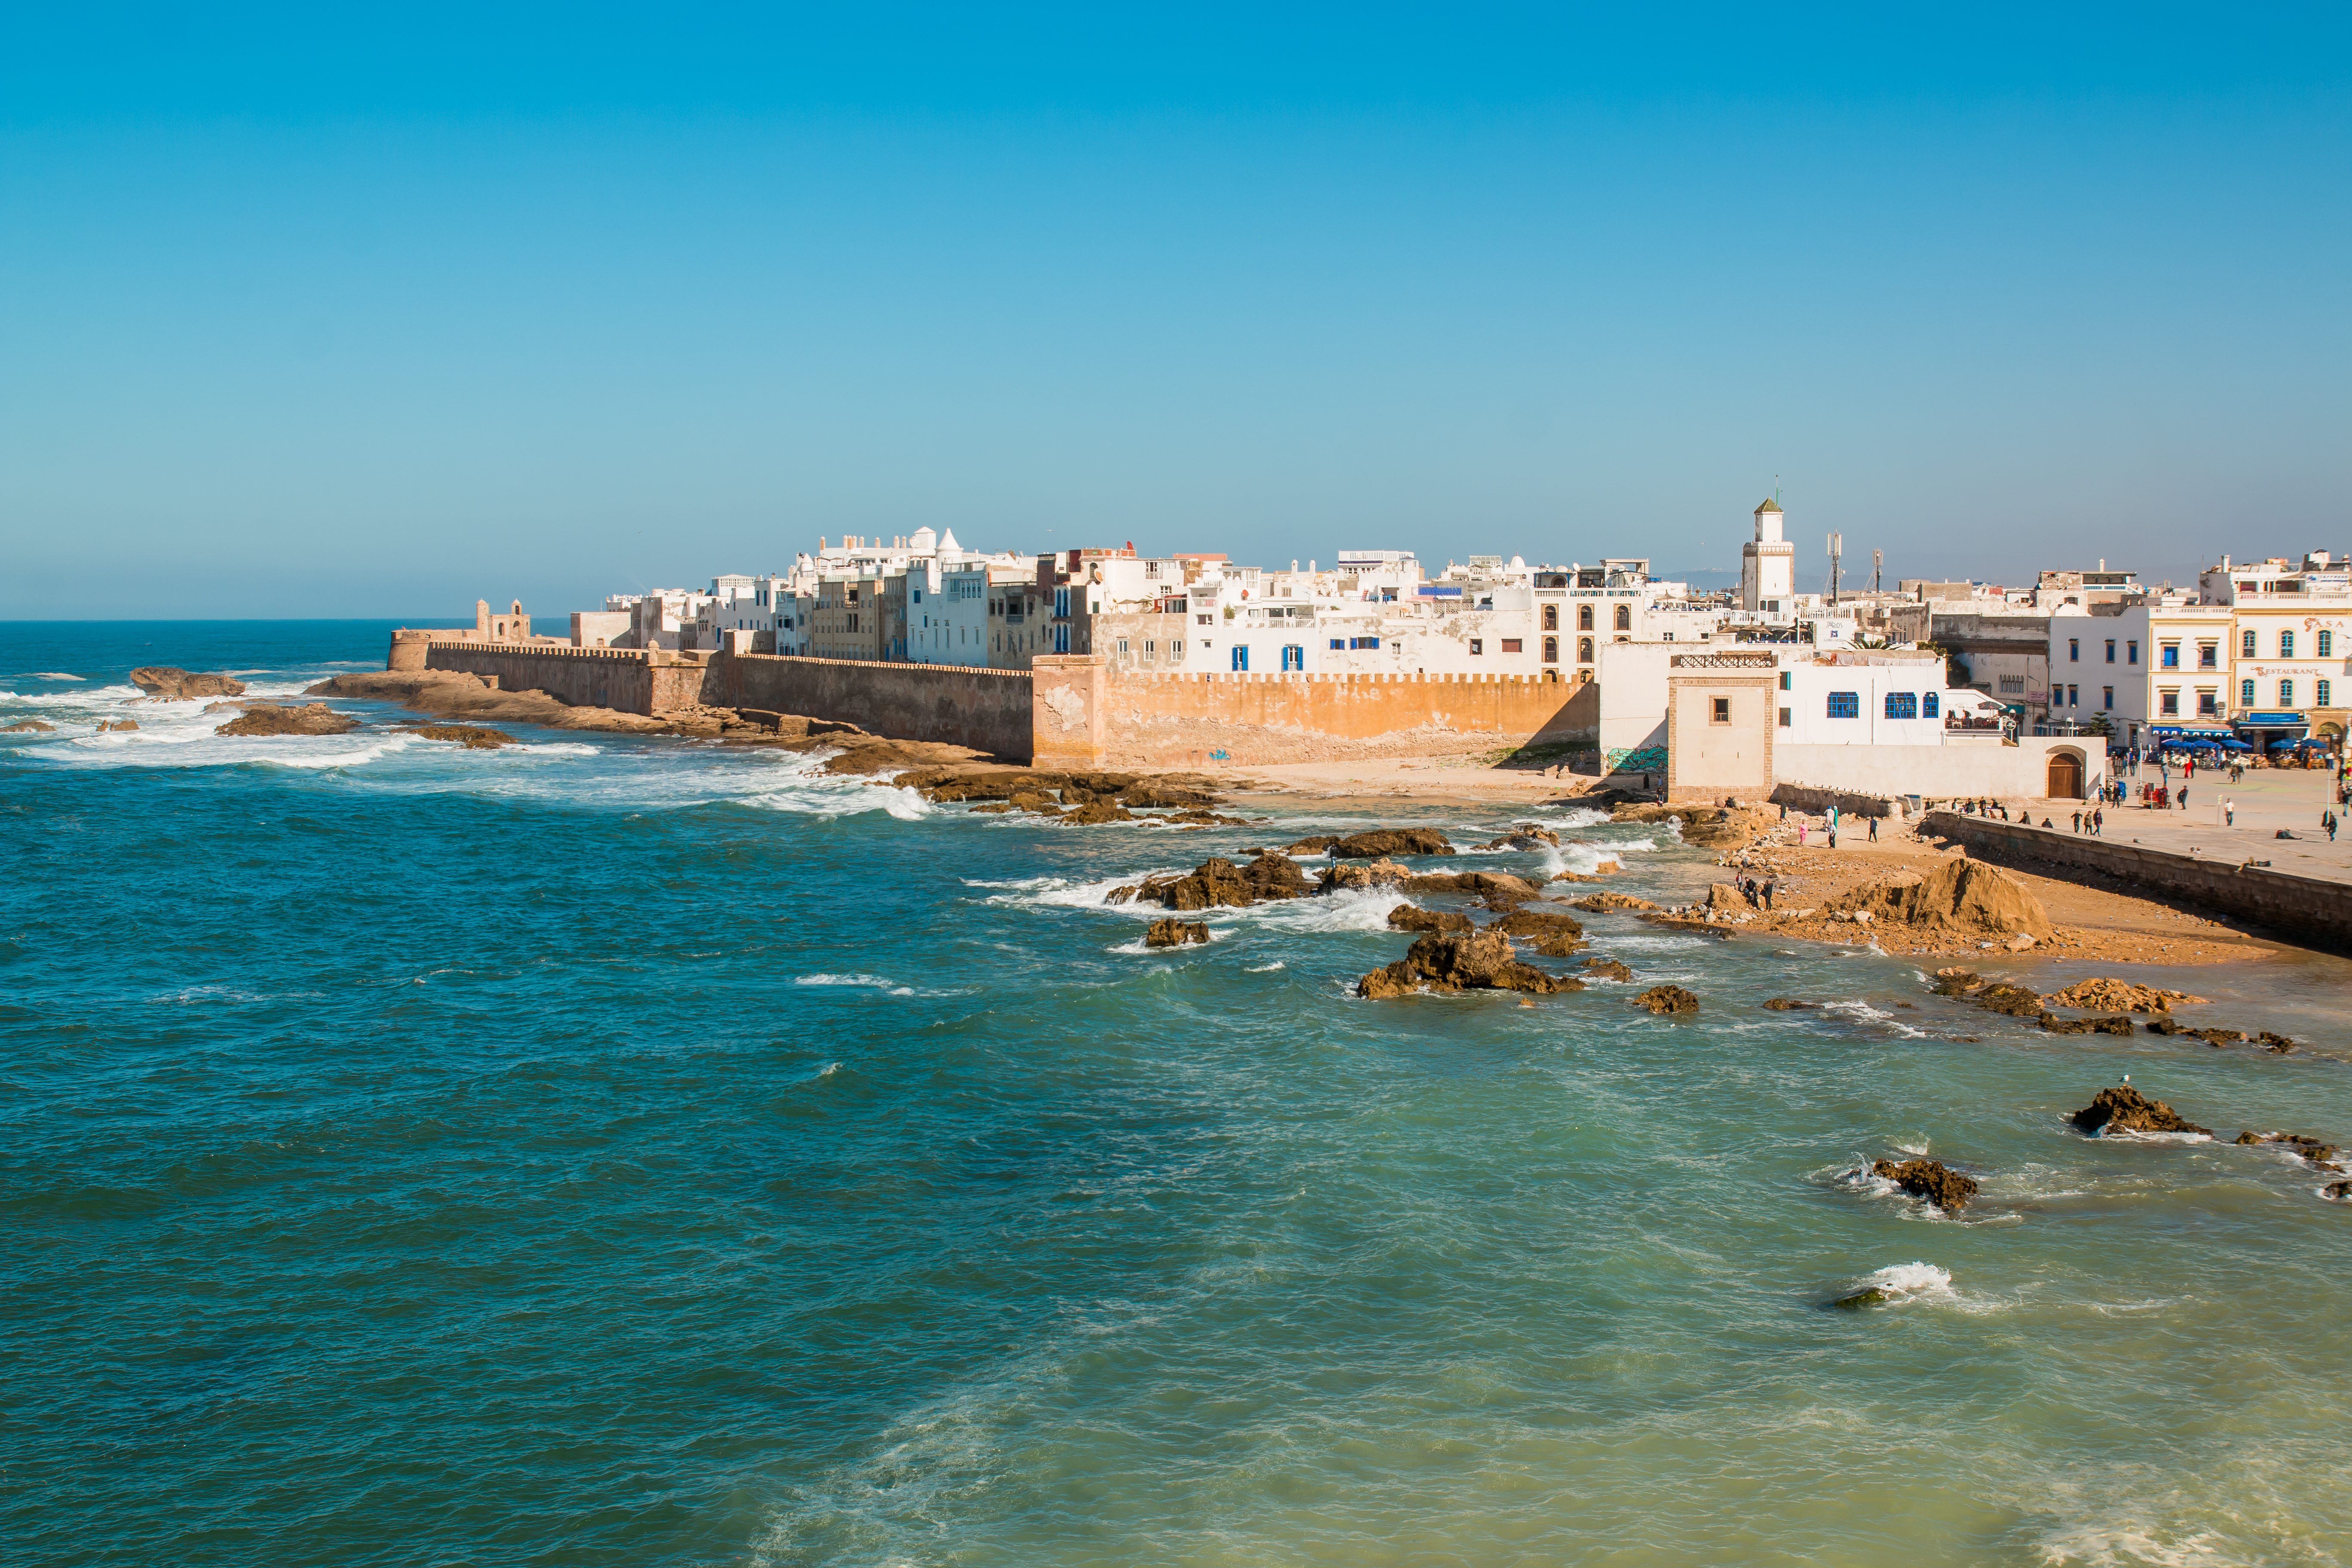 View to Essaouira old city and ocean, Morocco